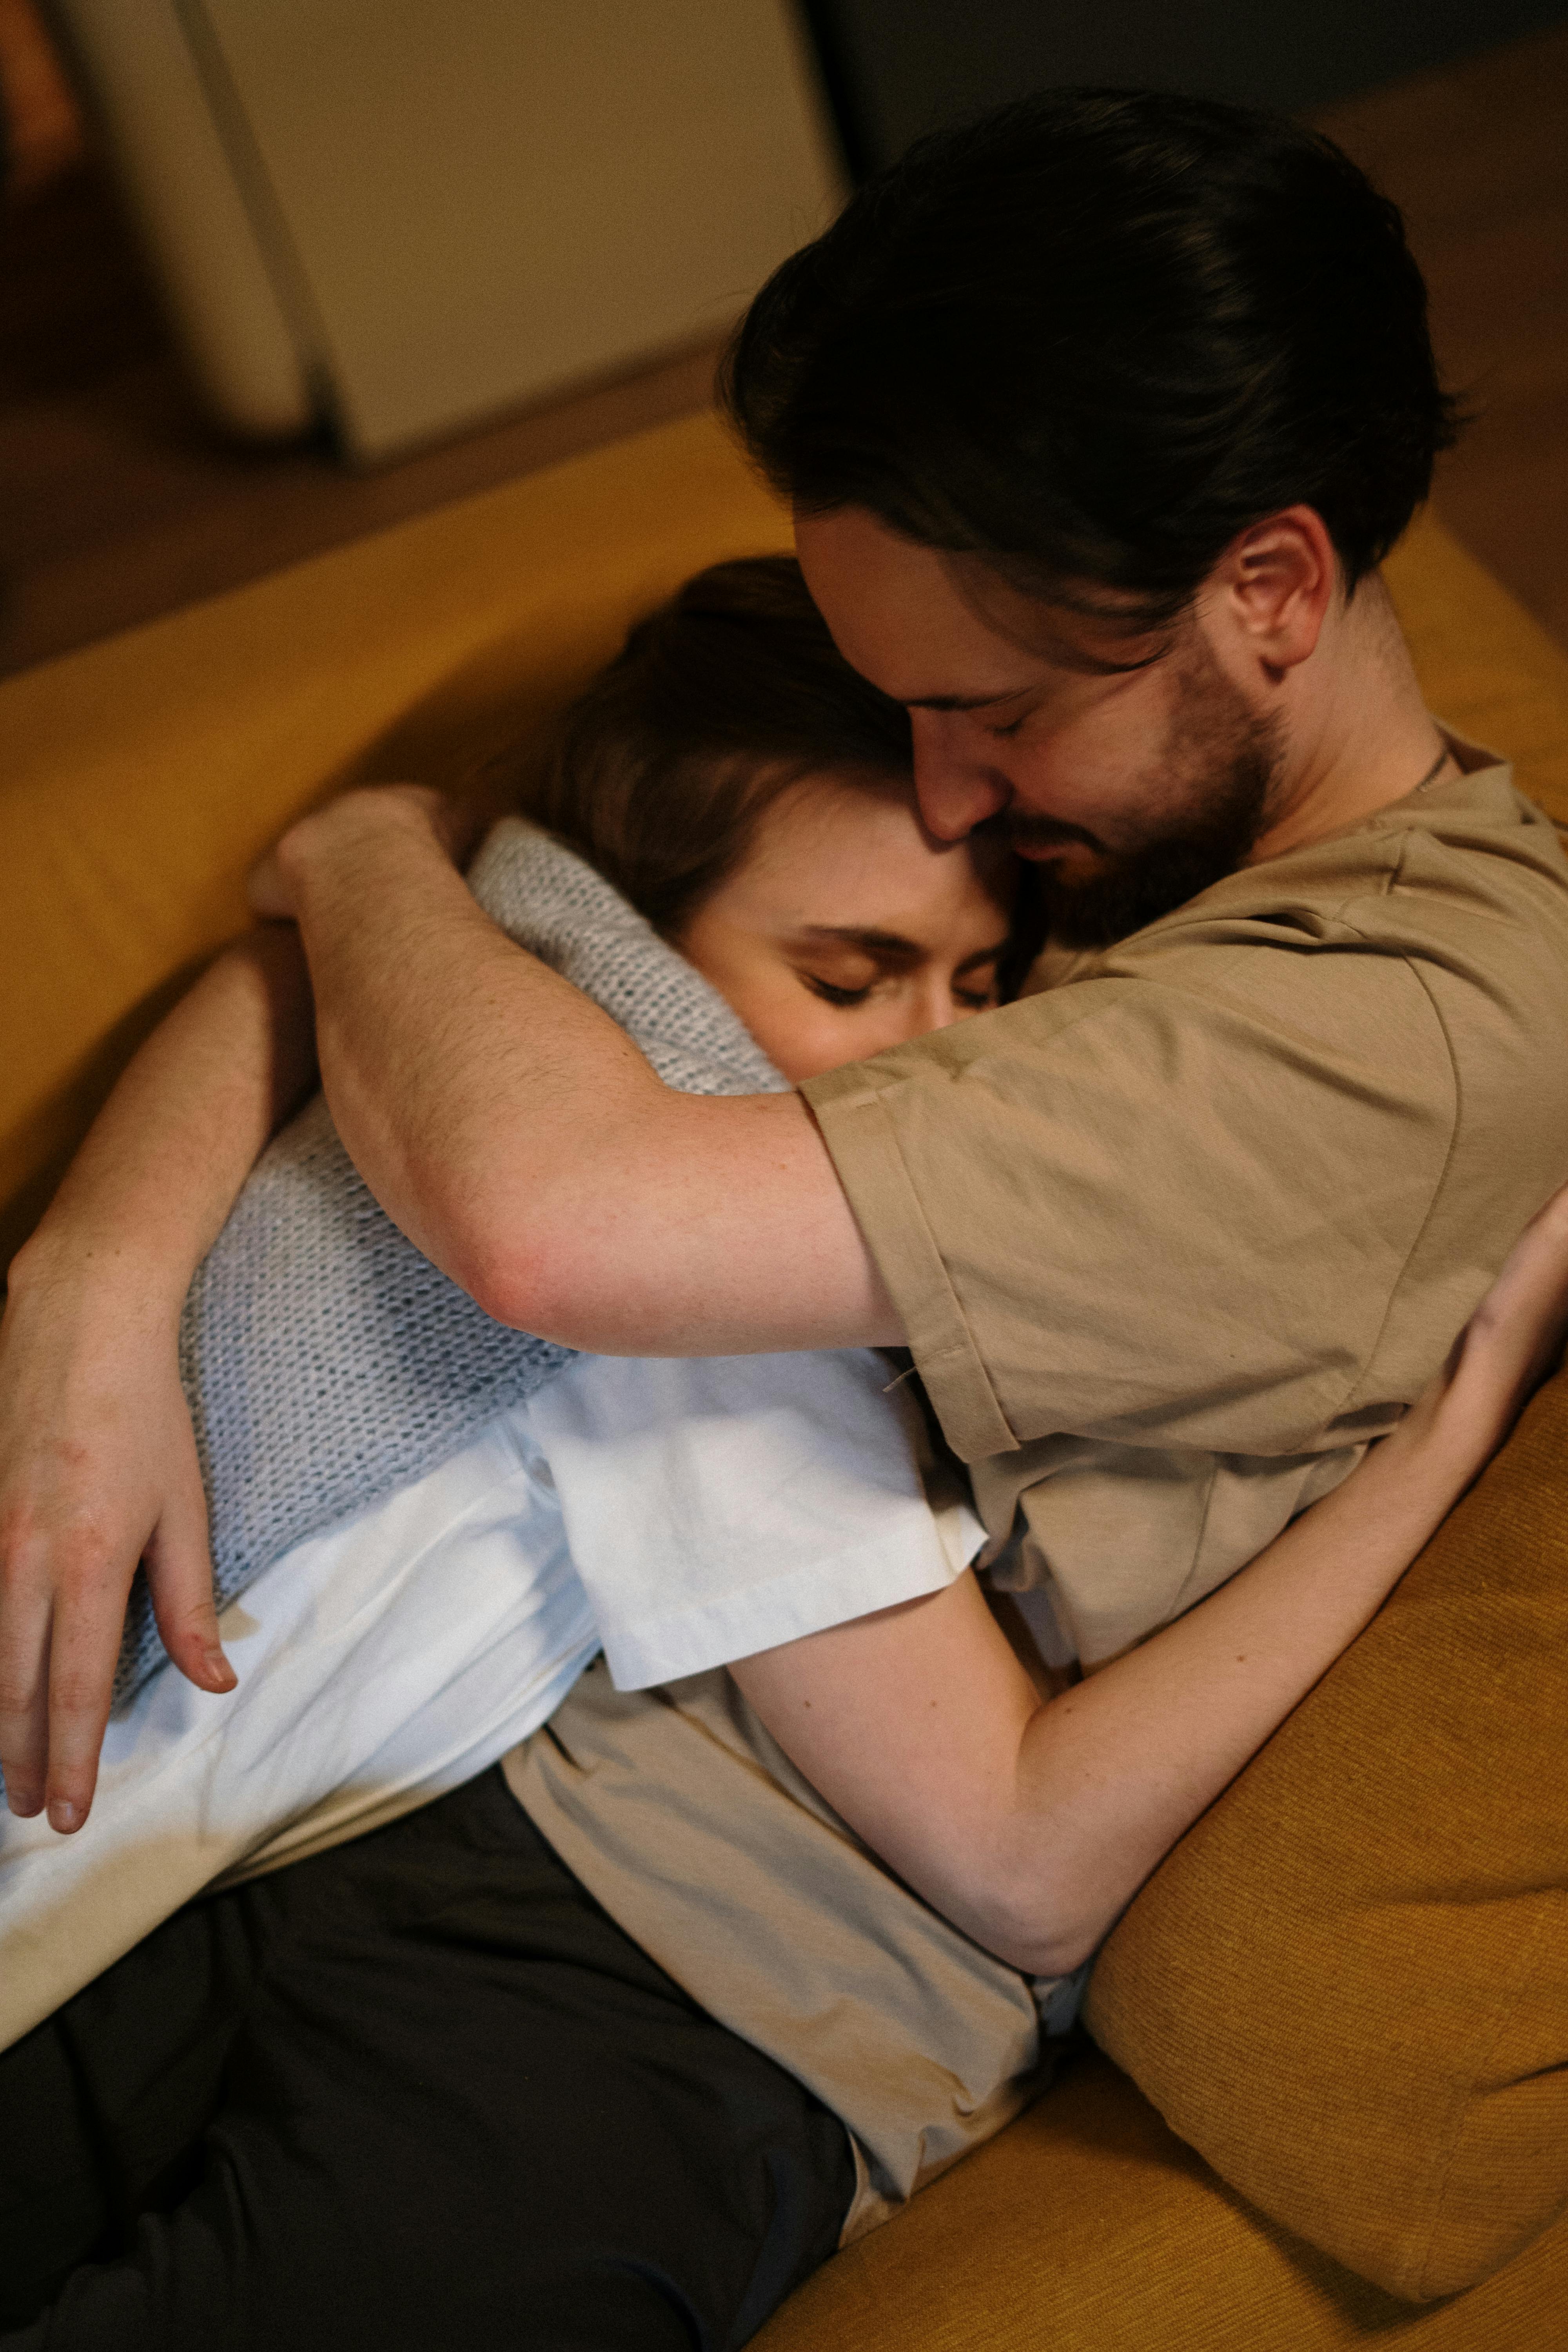 A couple embracing while lying on a couch | Source: Pexels